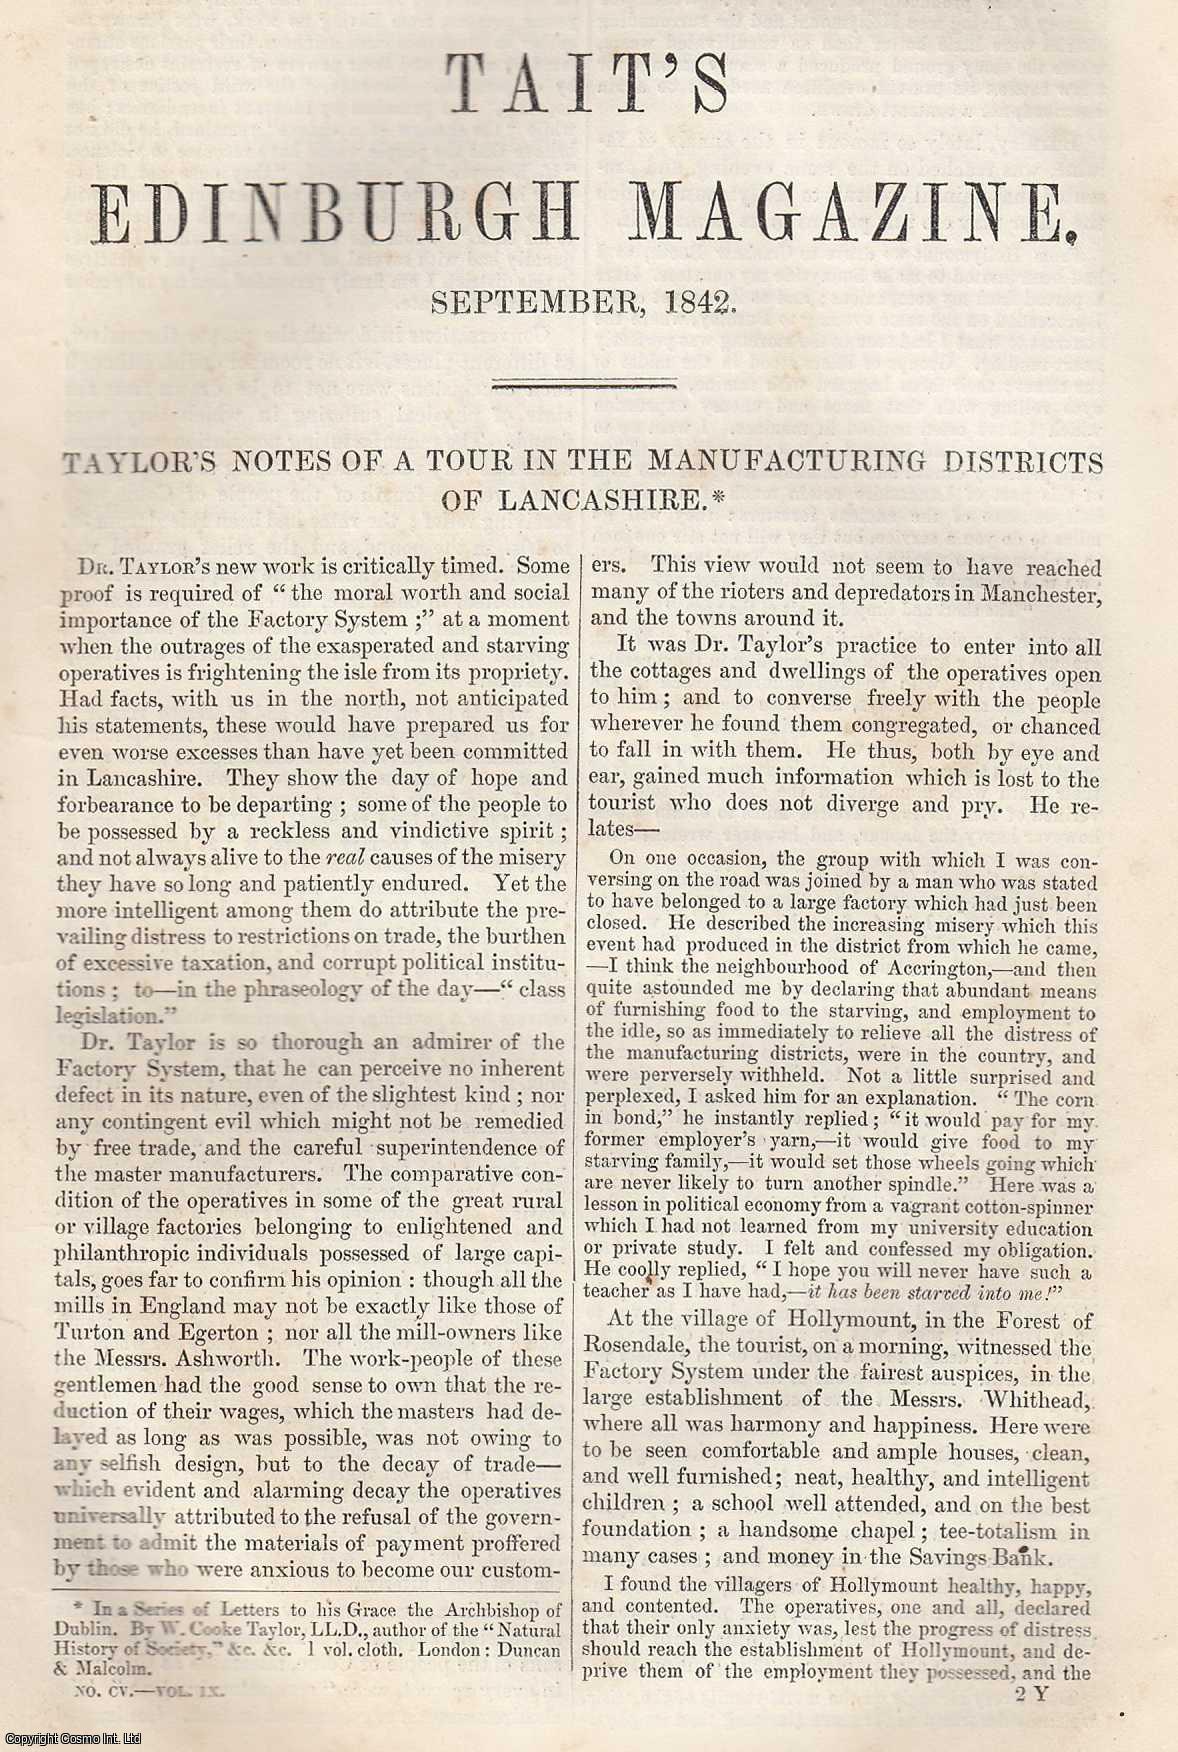 Johnstone, Christian - Taylor's Notes of a Tour in The Manufacturing Districts of Lancashire. An original article from Tait's Edinburgh Magazine, 1842.